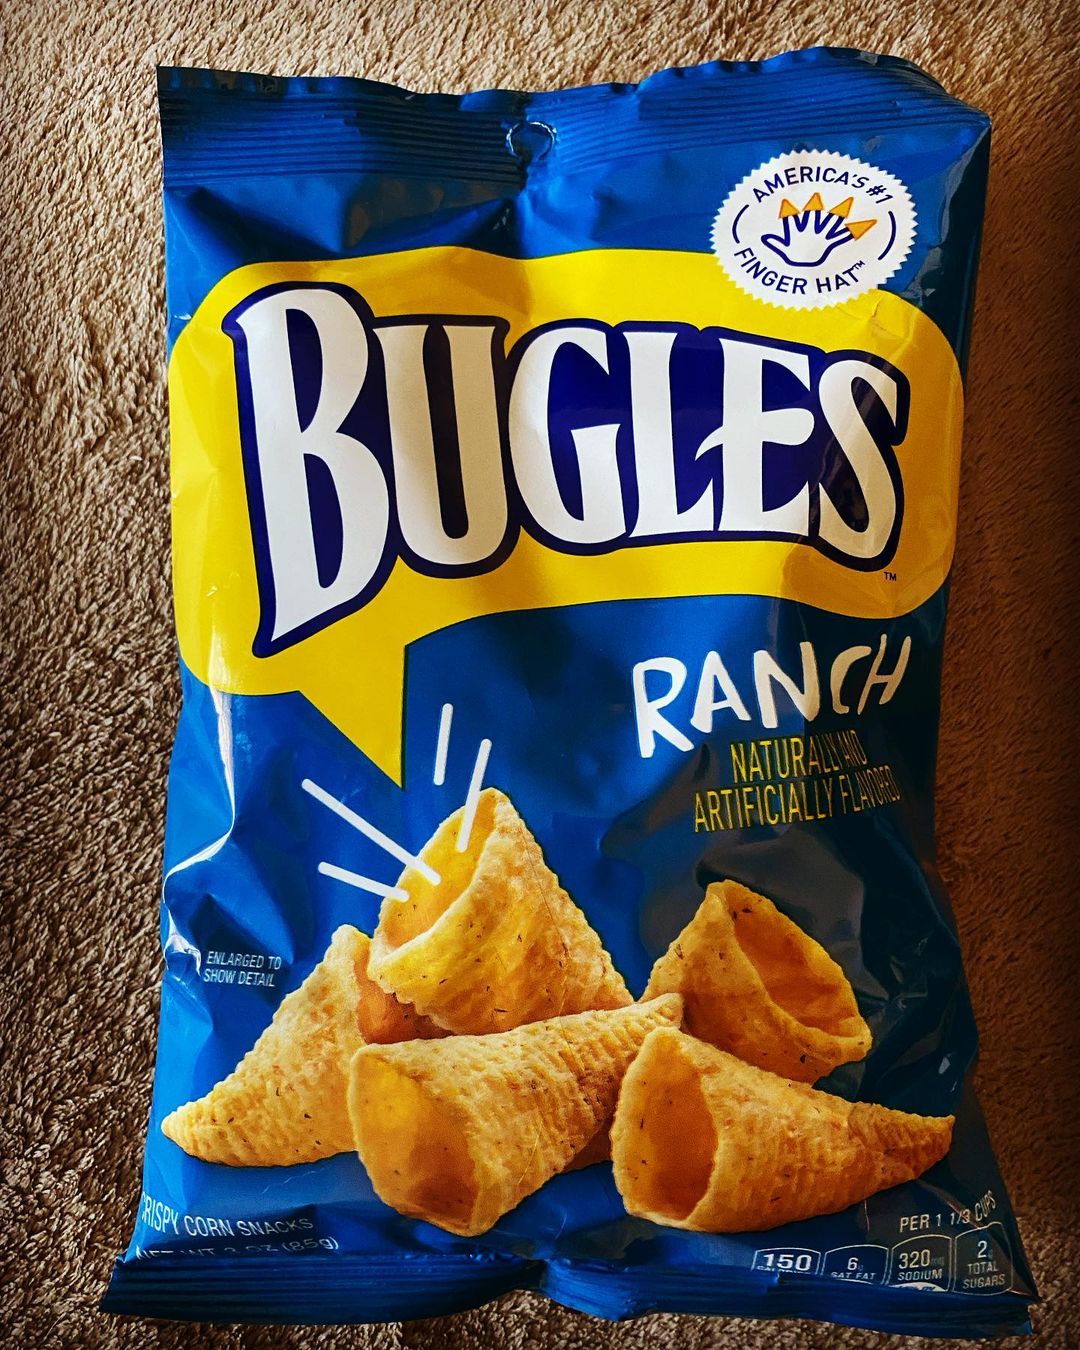 Bugles Chips